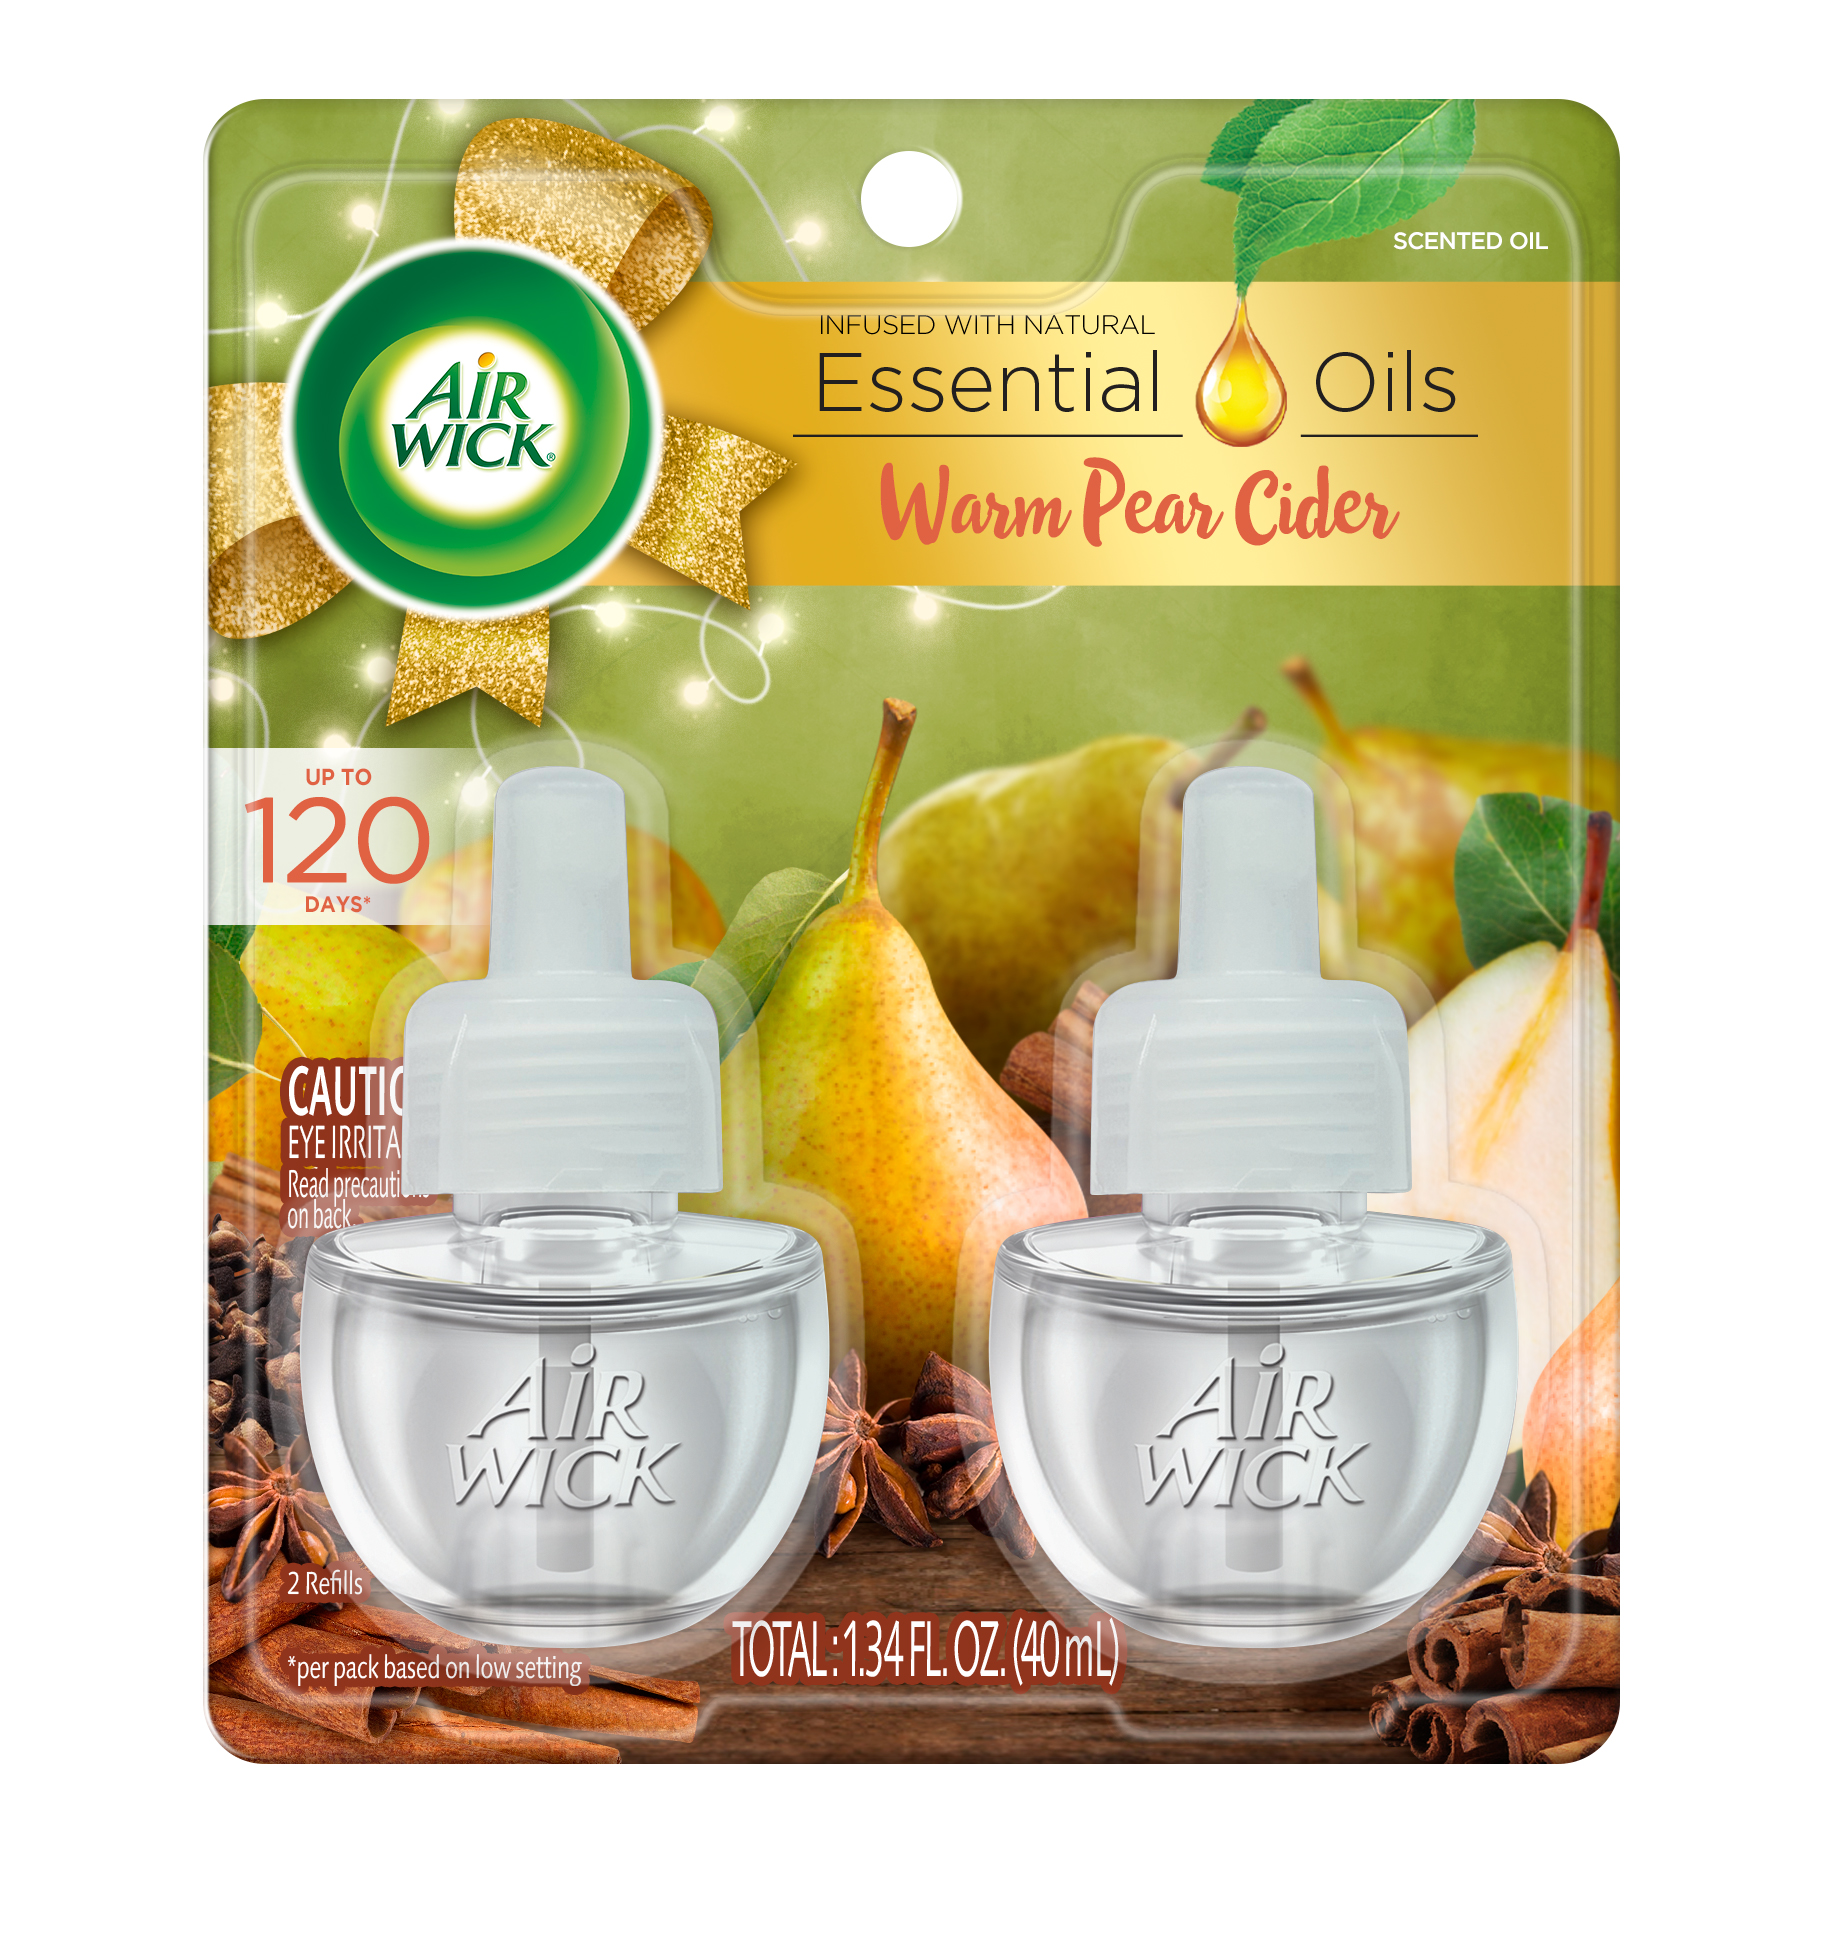 AIR WICK® Scented Oil - Warm Pear Cider